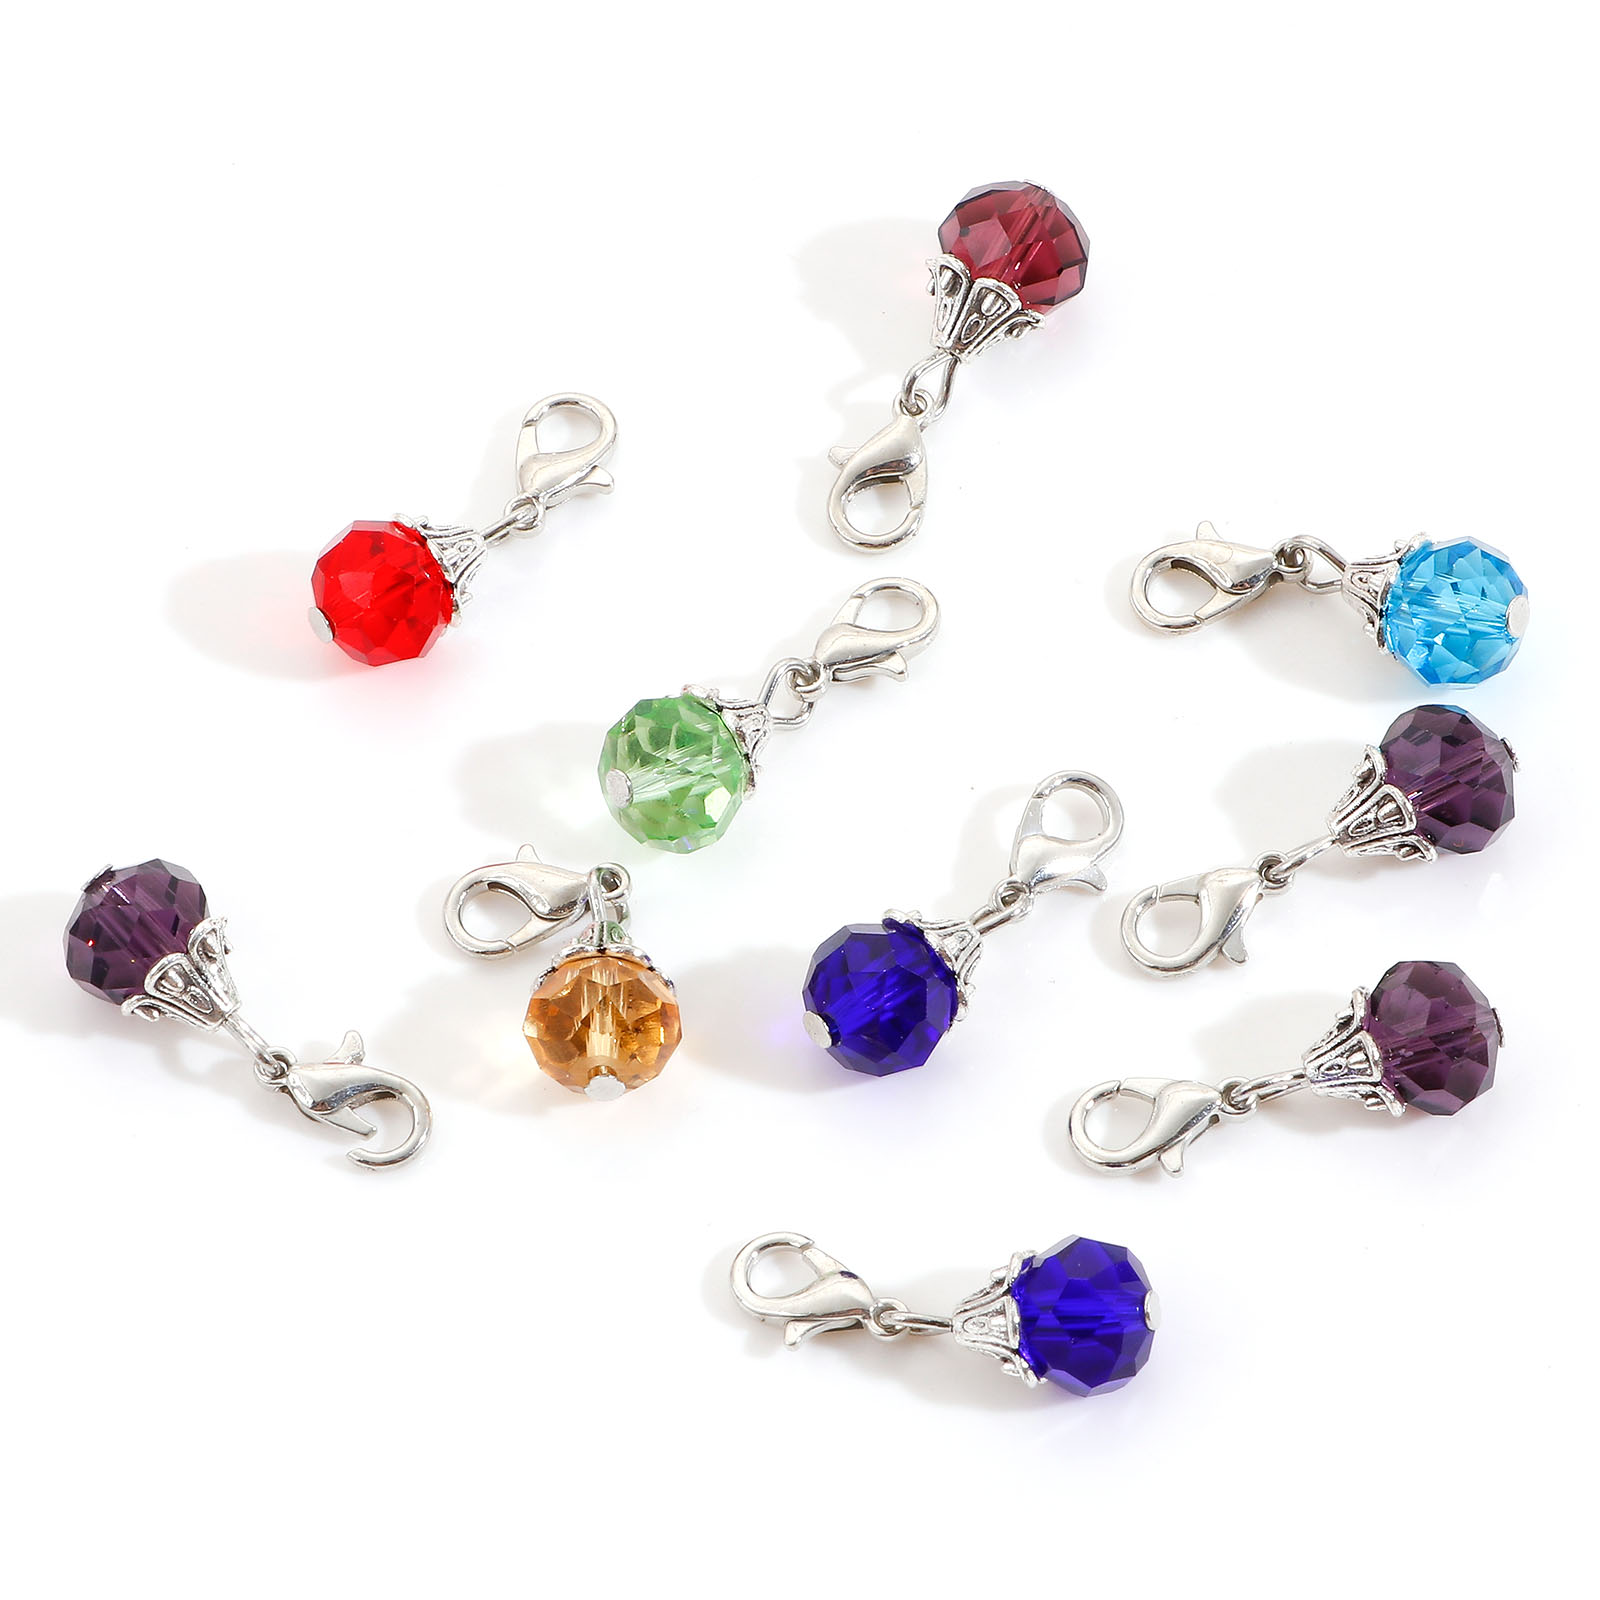 Picture of Glass Knitting Stitch Markers Round At Random Color 10 PCs